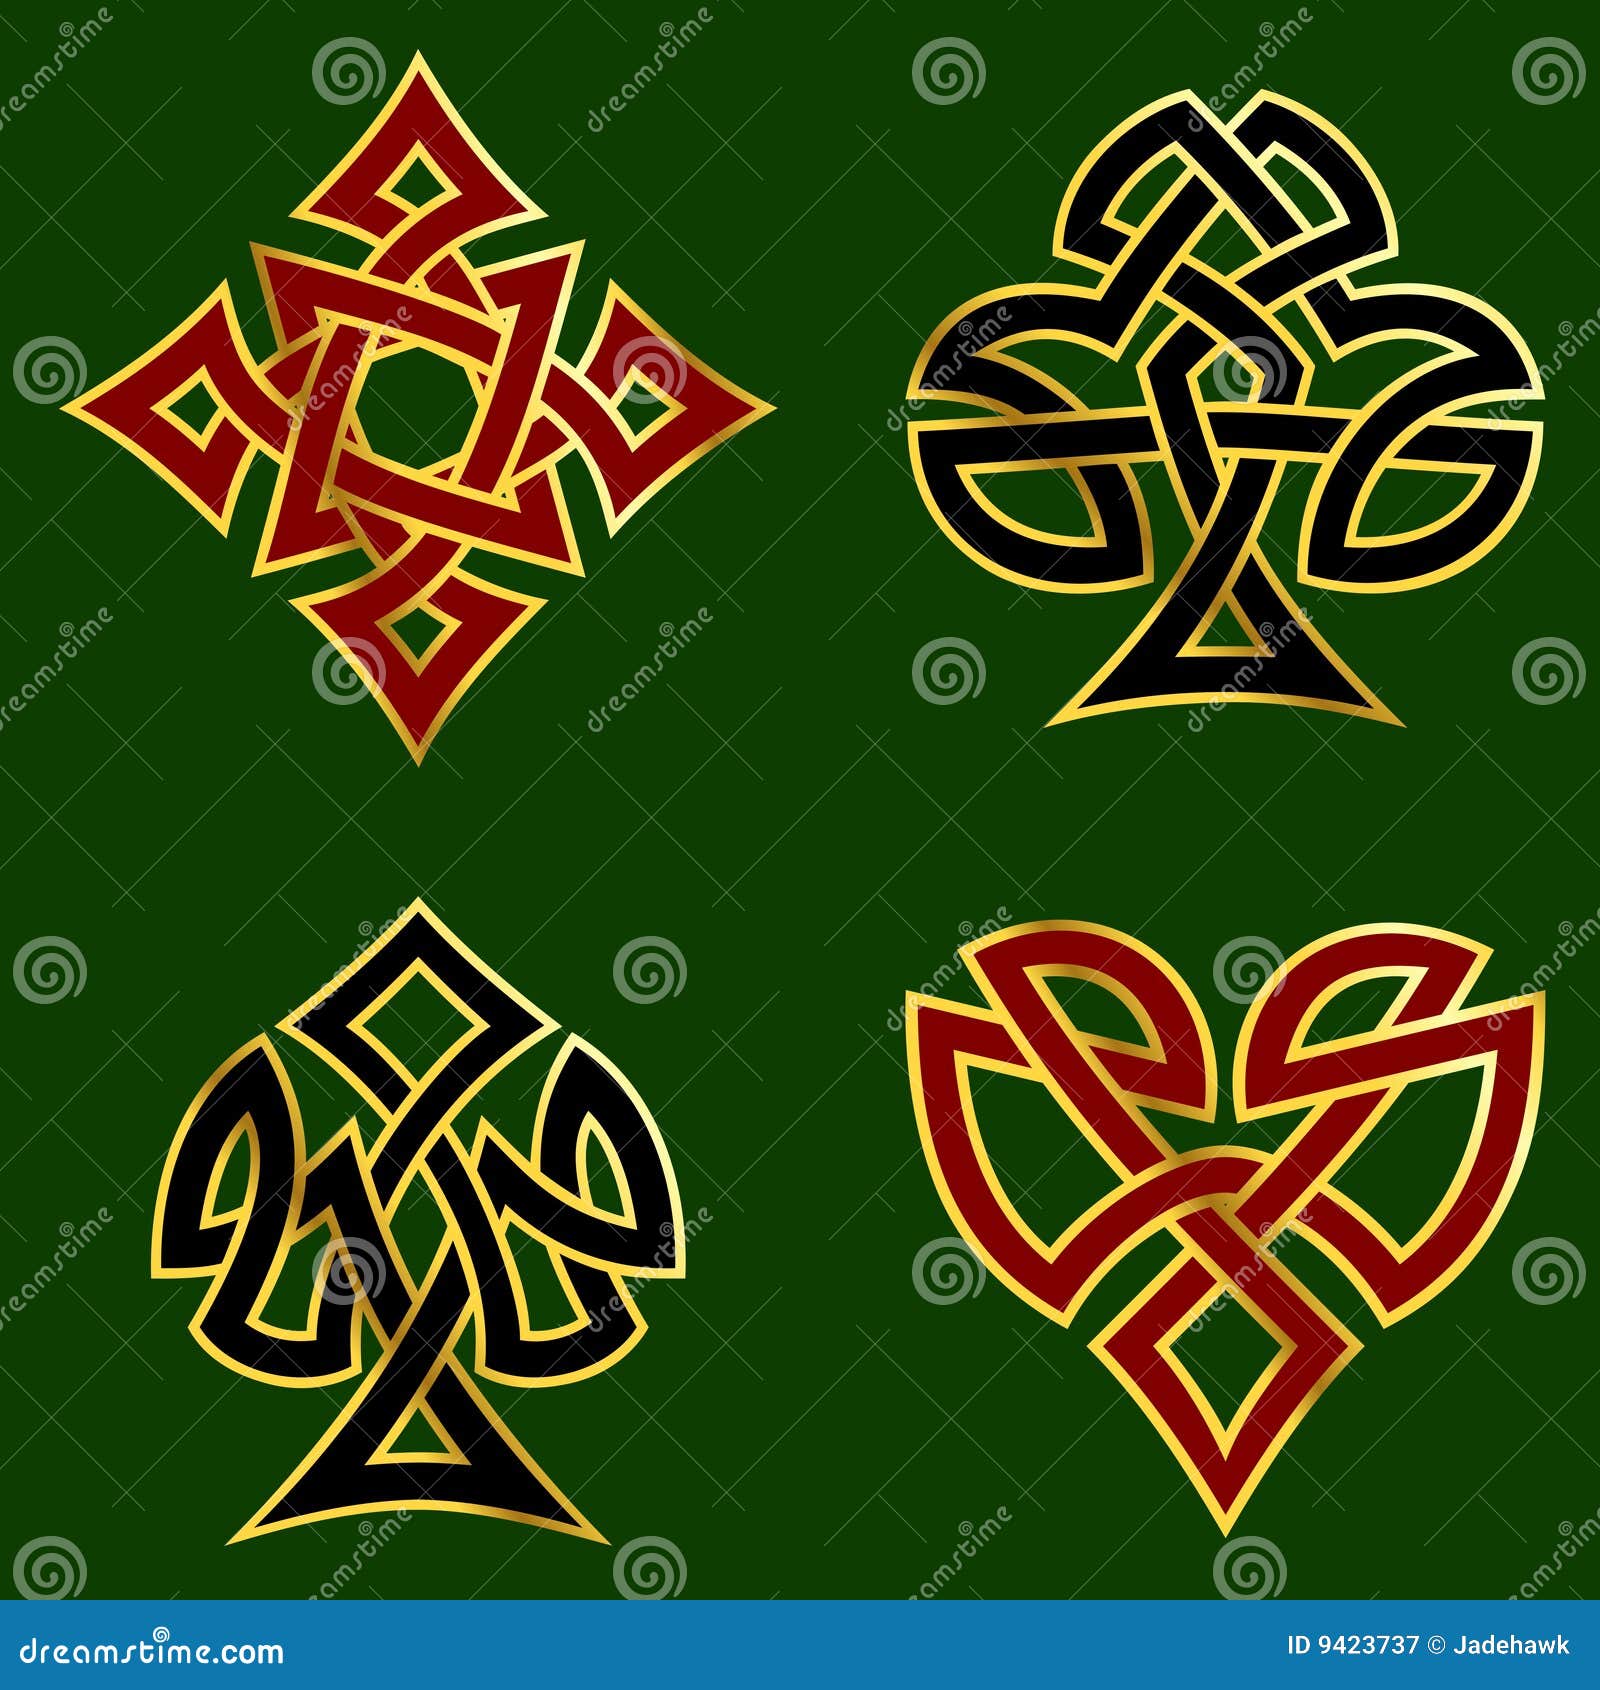 knotwork card suits